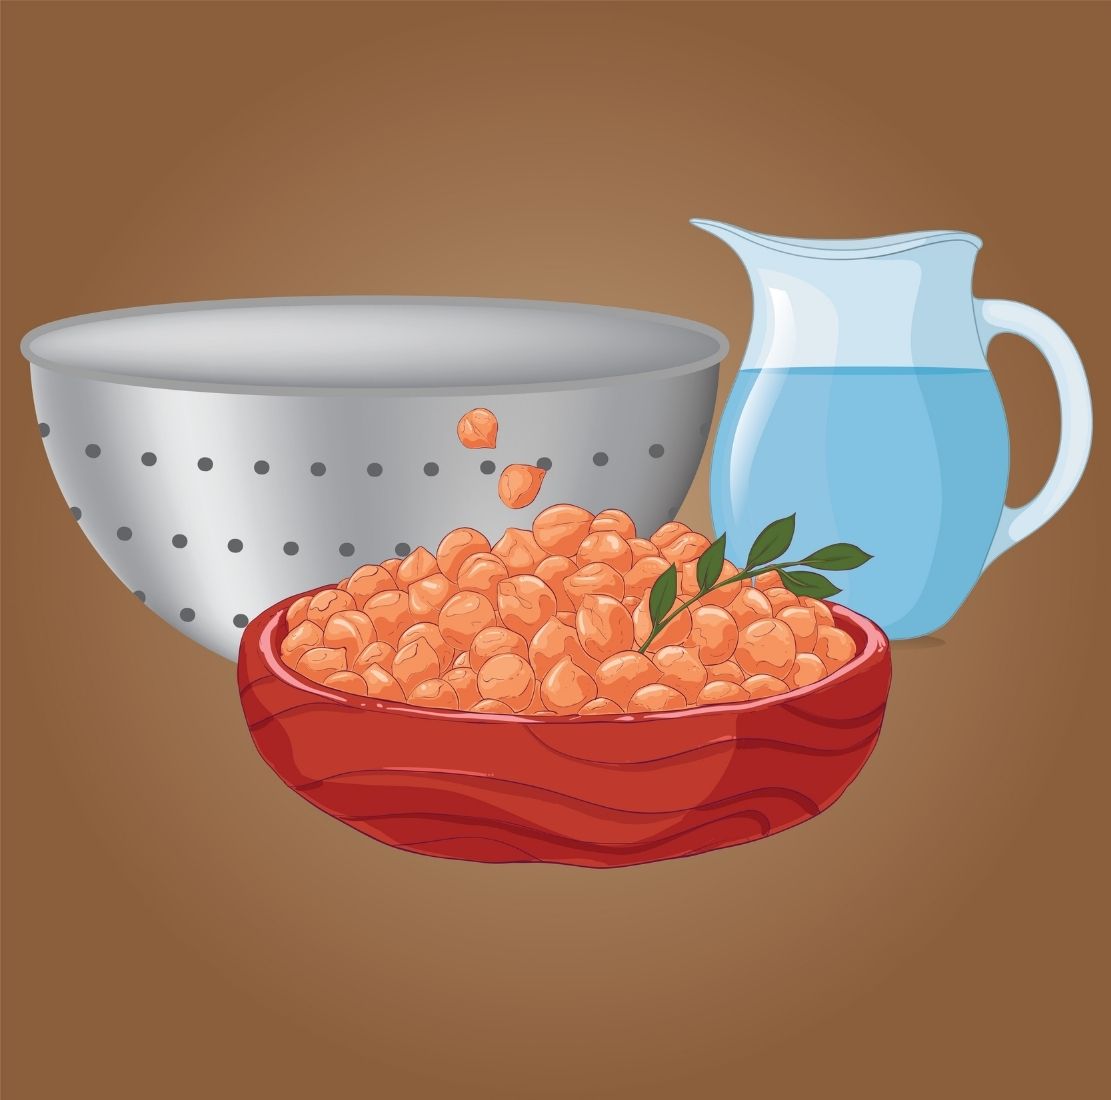 chickpeas have been properly soaked. rinse them again with clean water